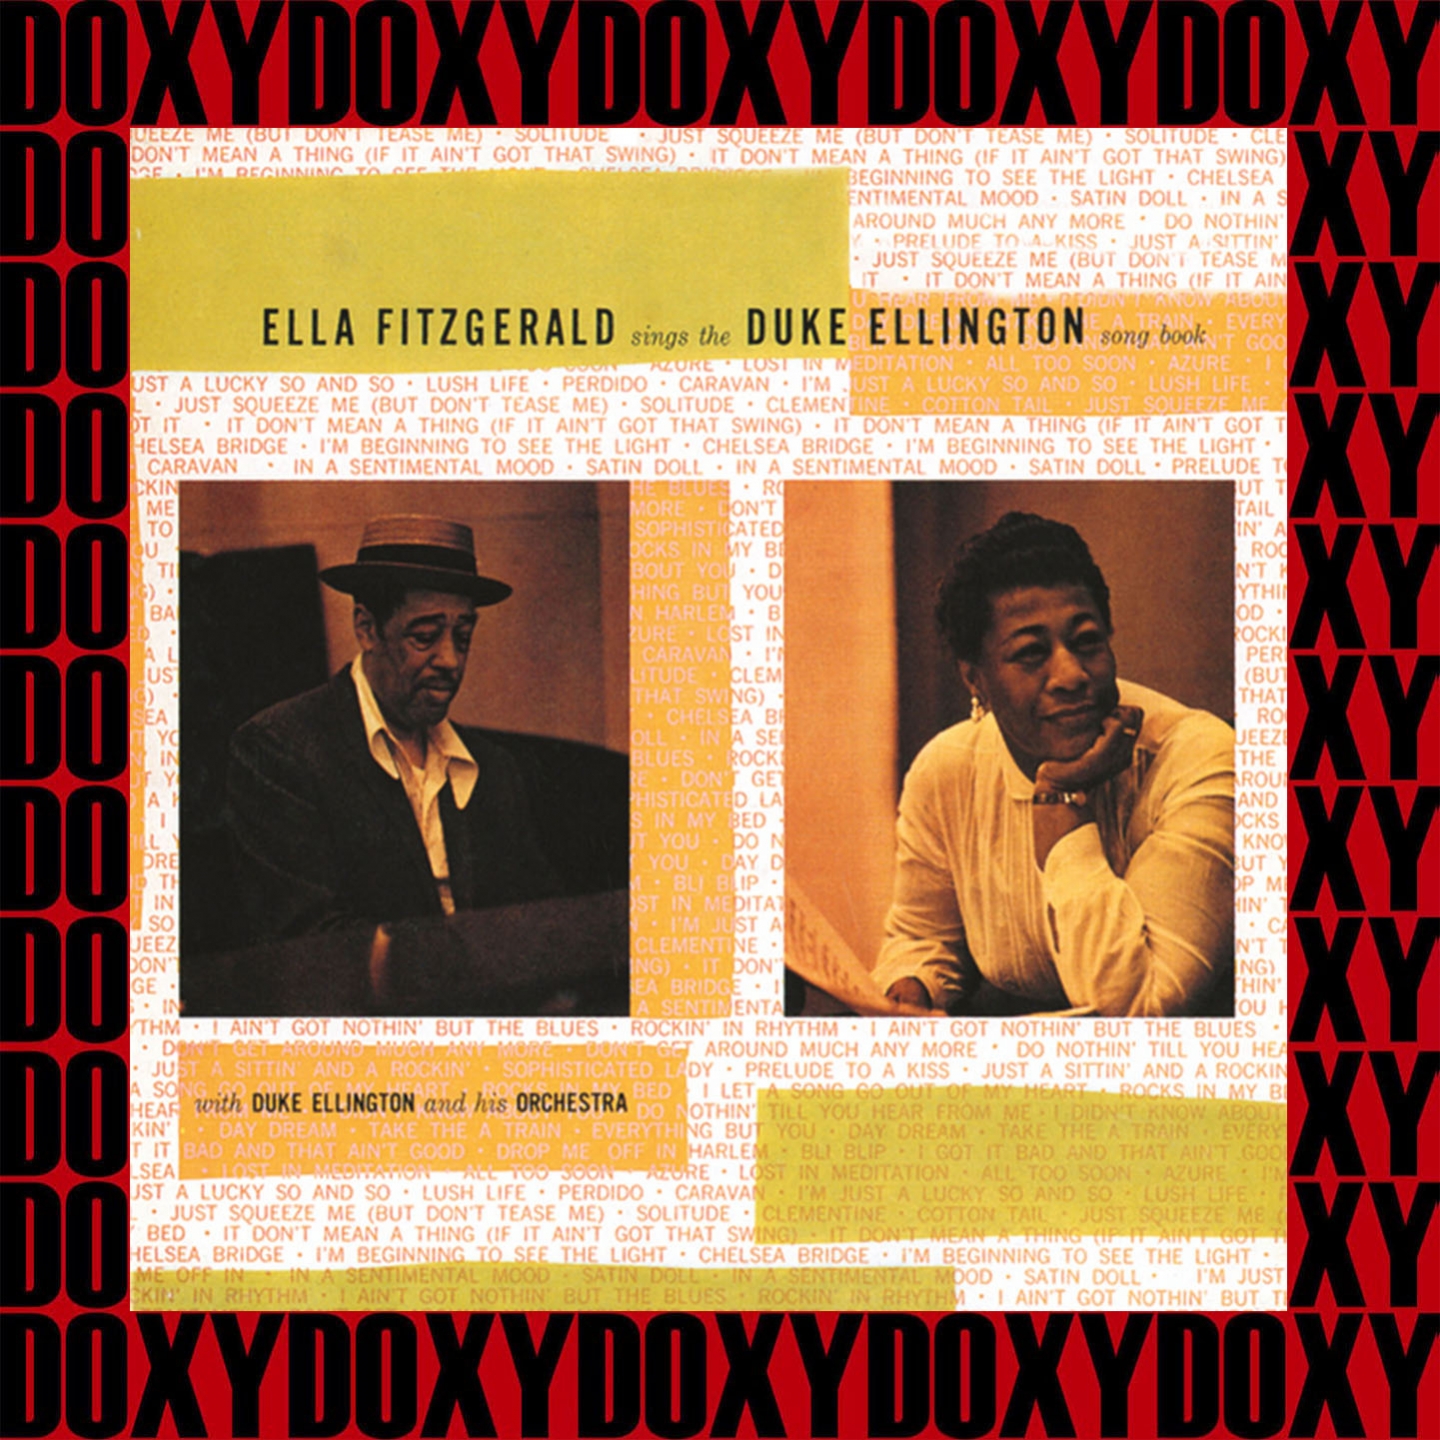 Ella Fitzgerald Sings The Duke Ellington Song Book, Hd Remastered (Remastered Version) (Doxy Collection)